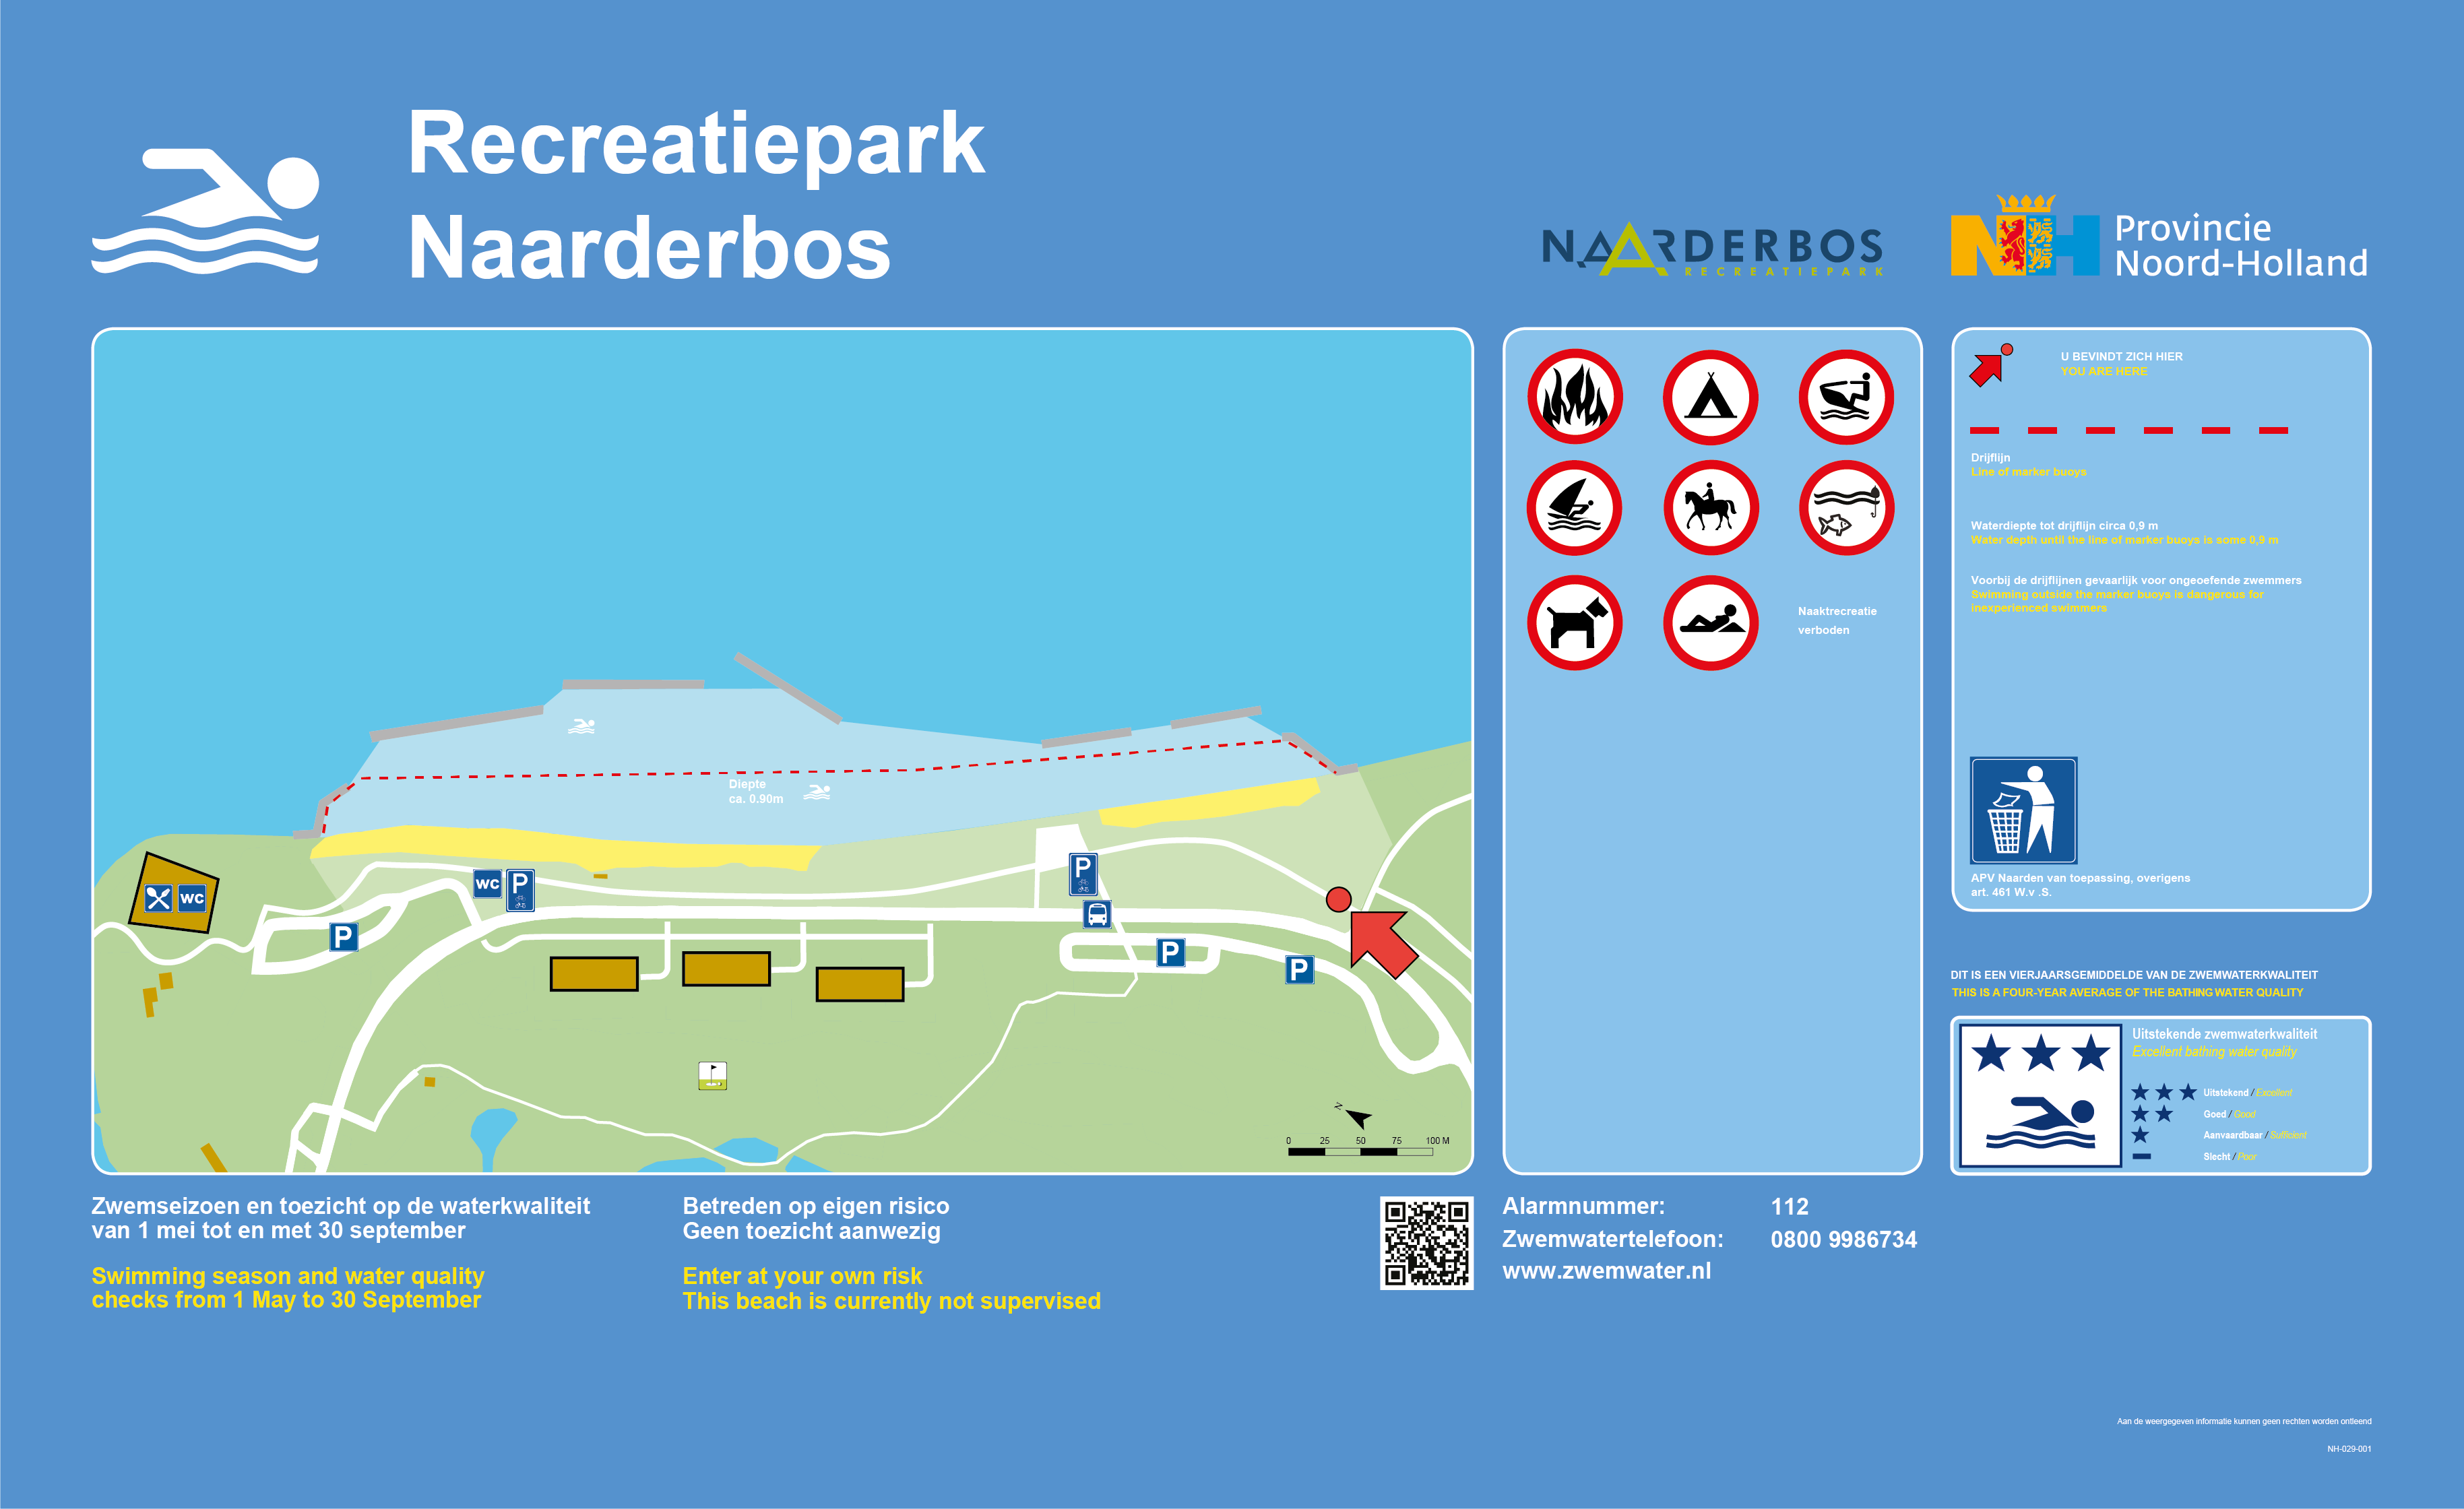 The information board at the swimming location Naarderbos